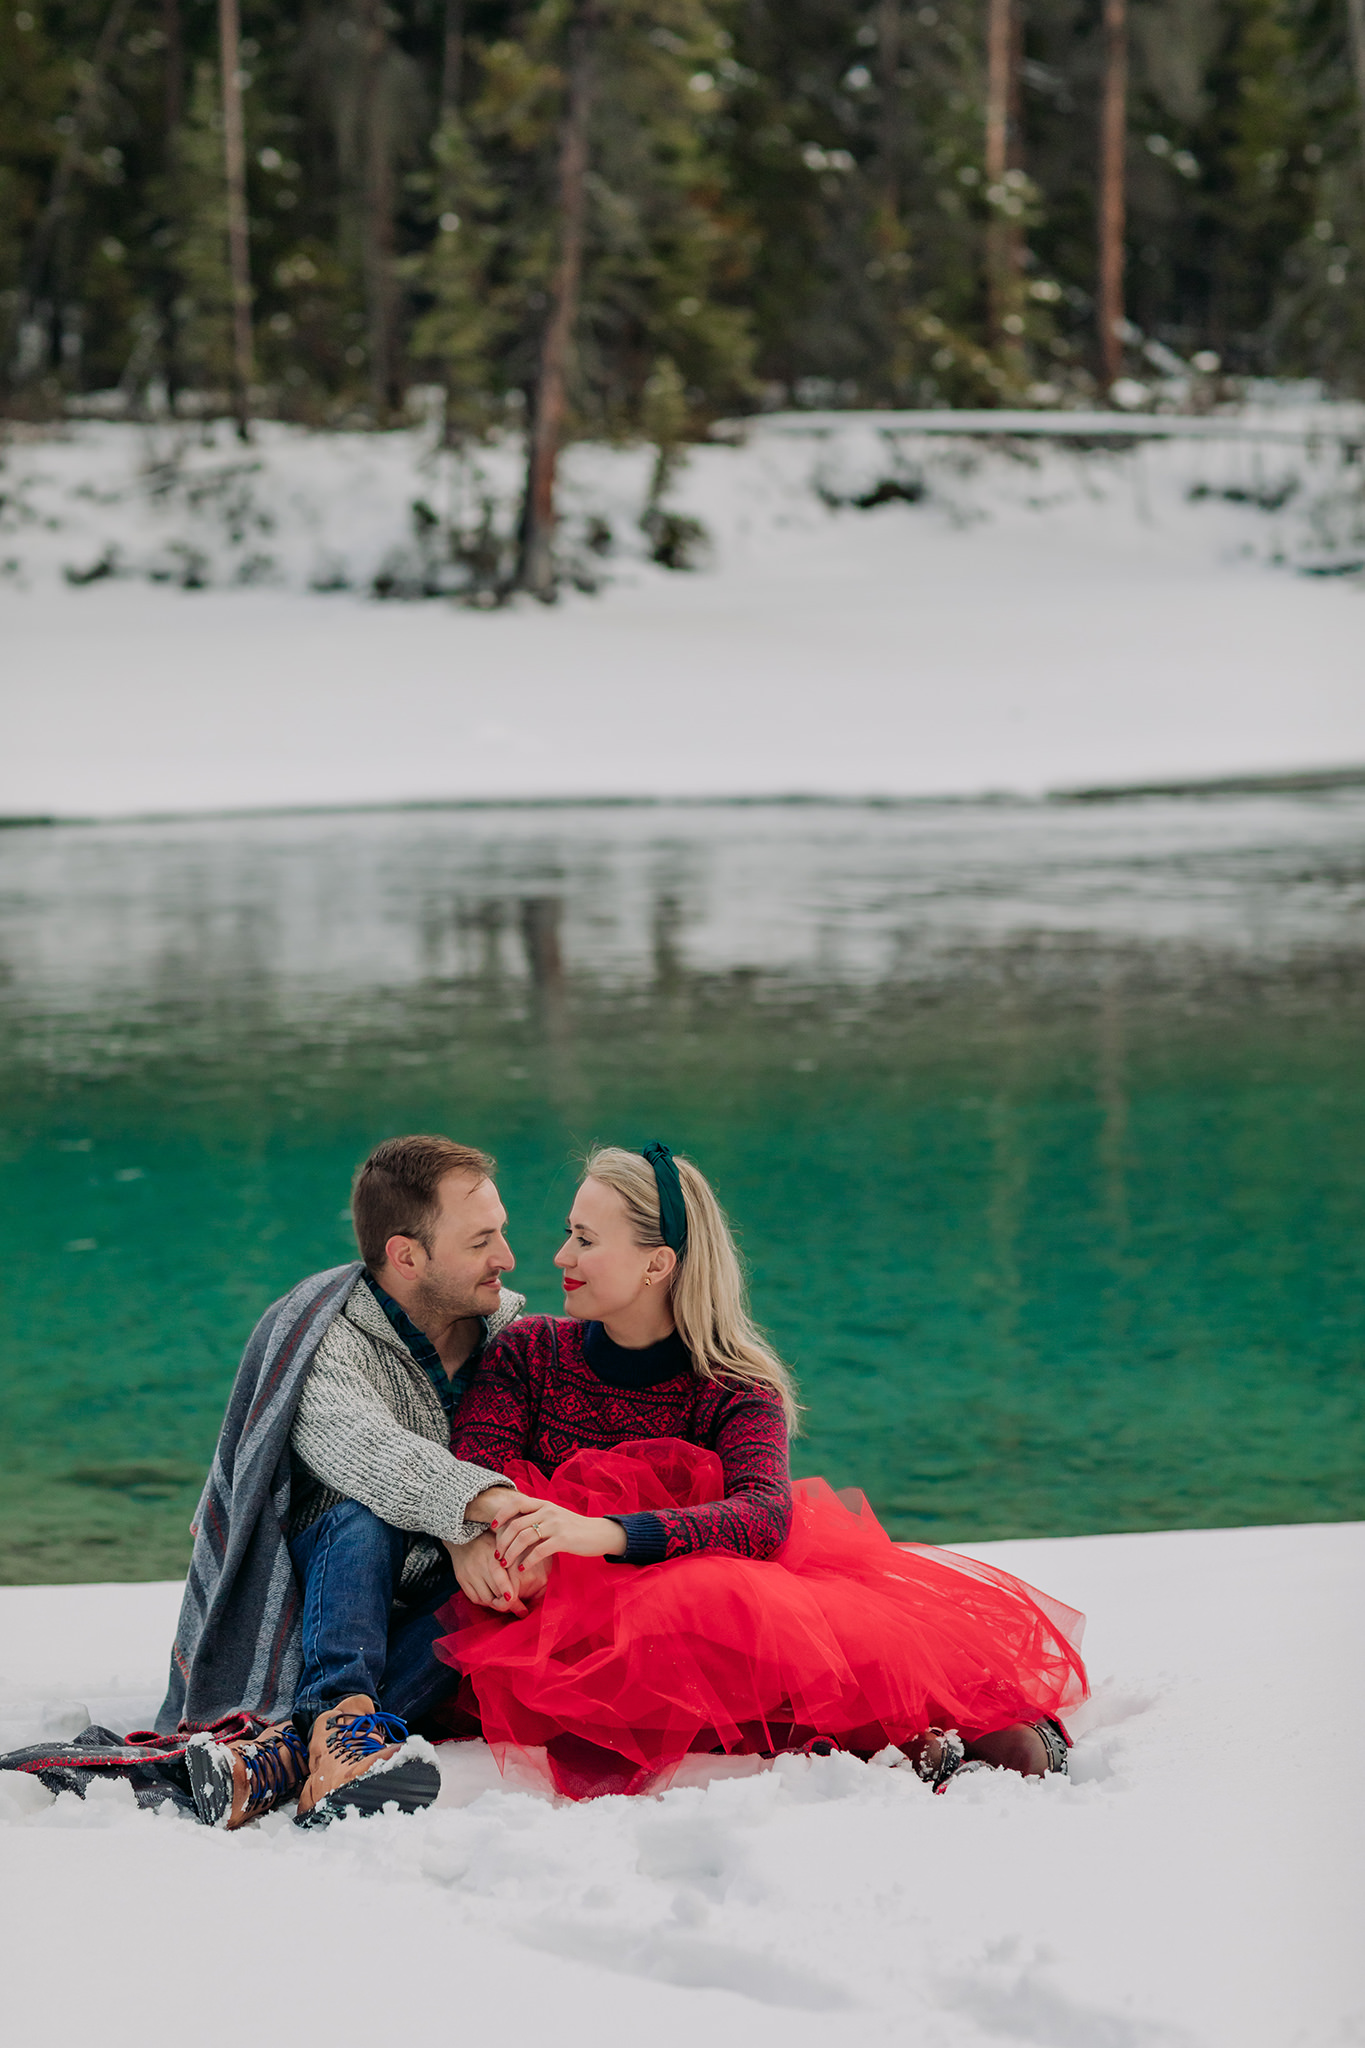 snowy natural bridge couples photos with freshly frozen lake featuring playful red tulle skirt & nordic sweater